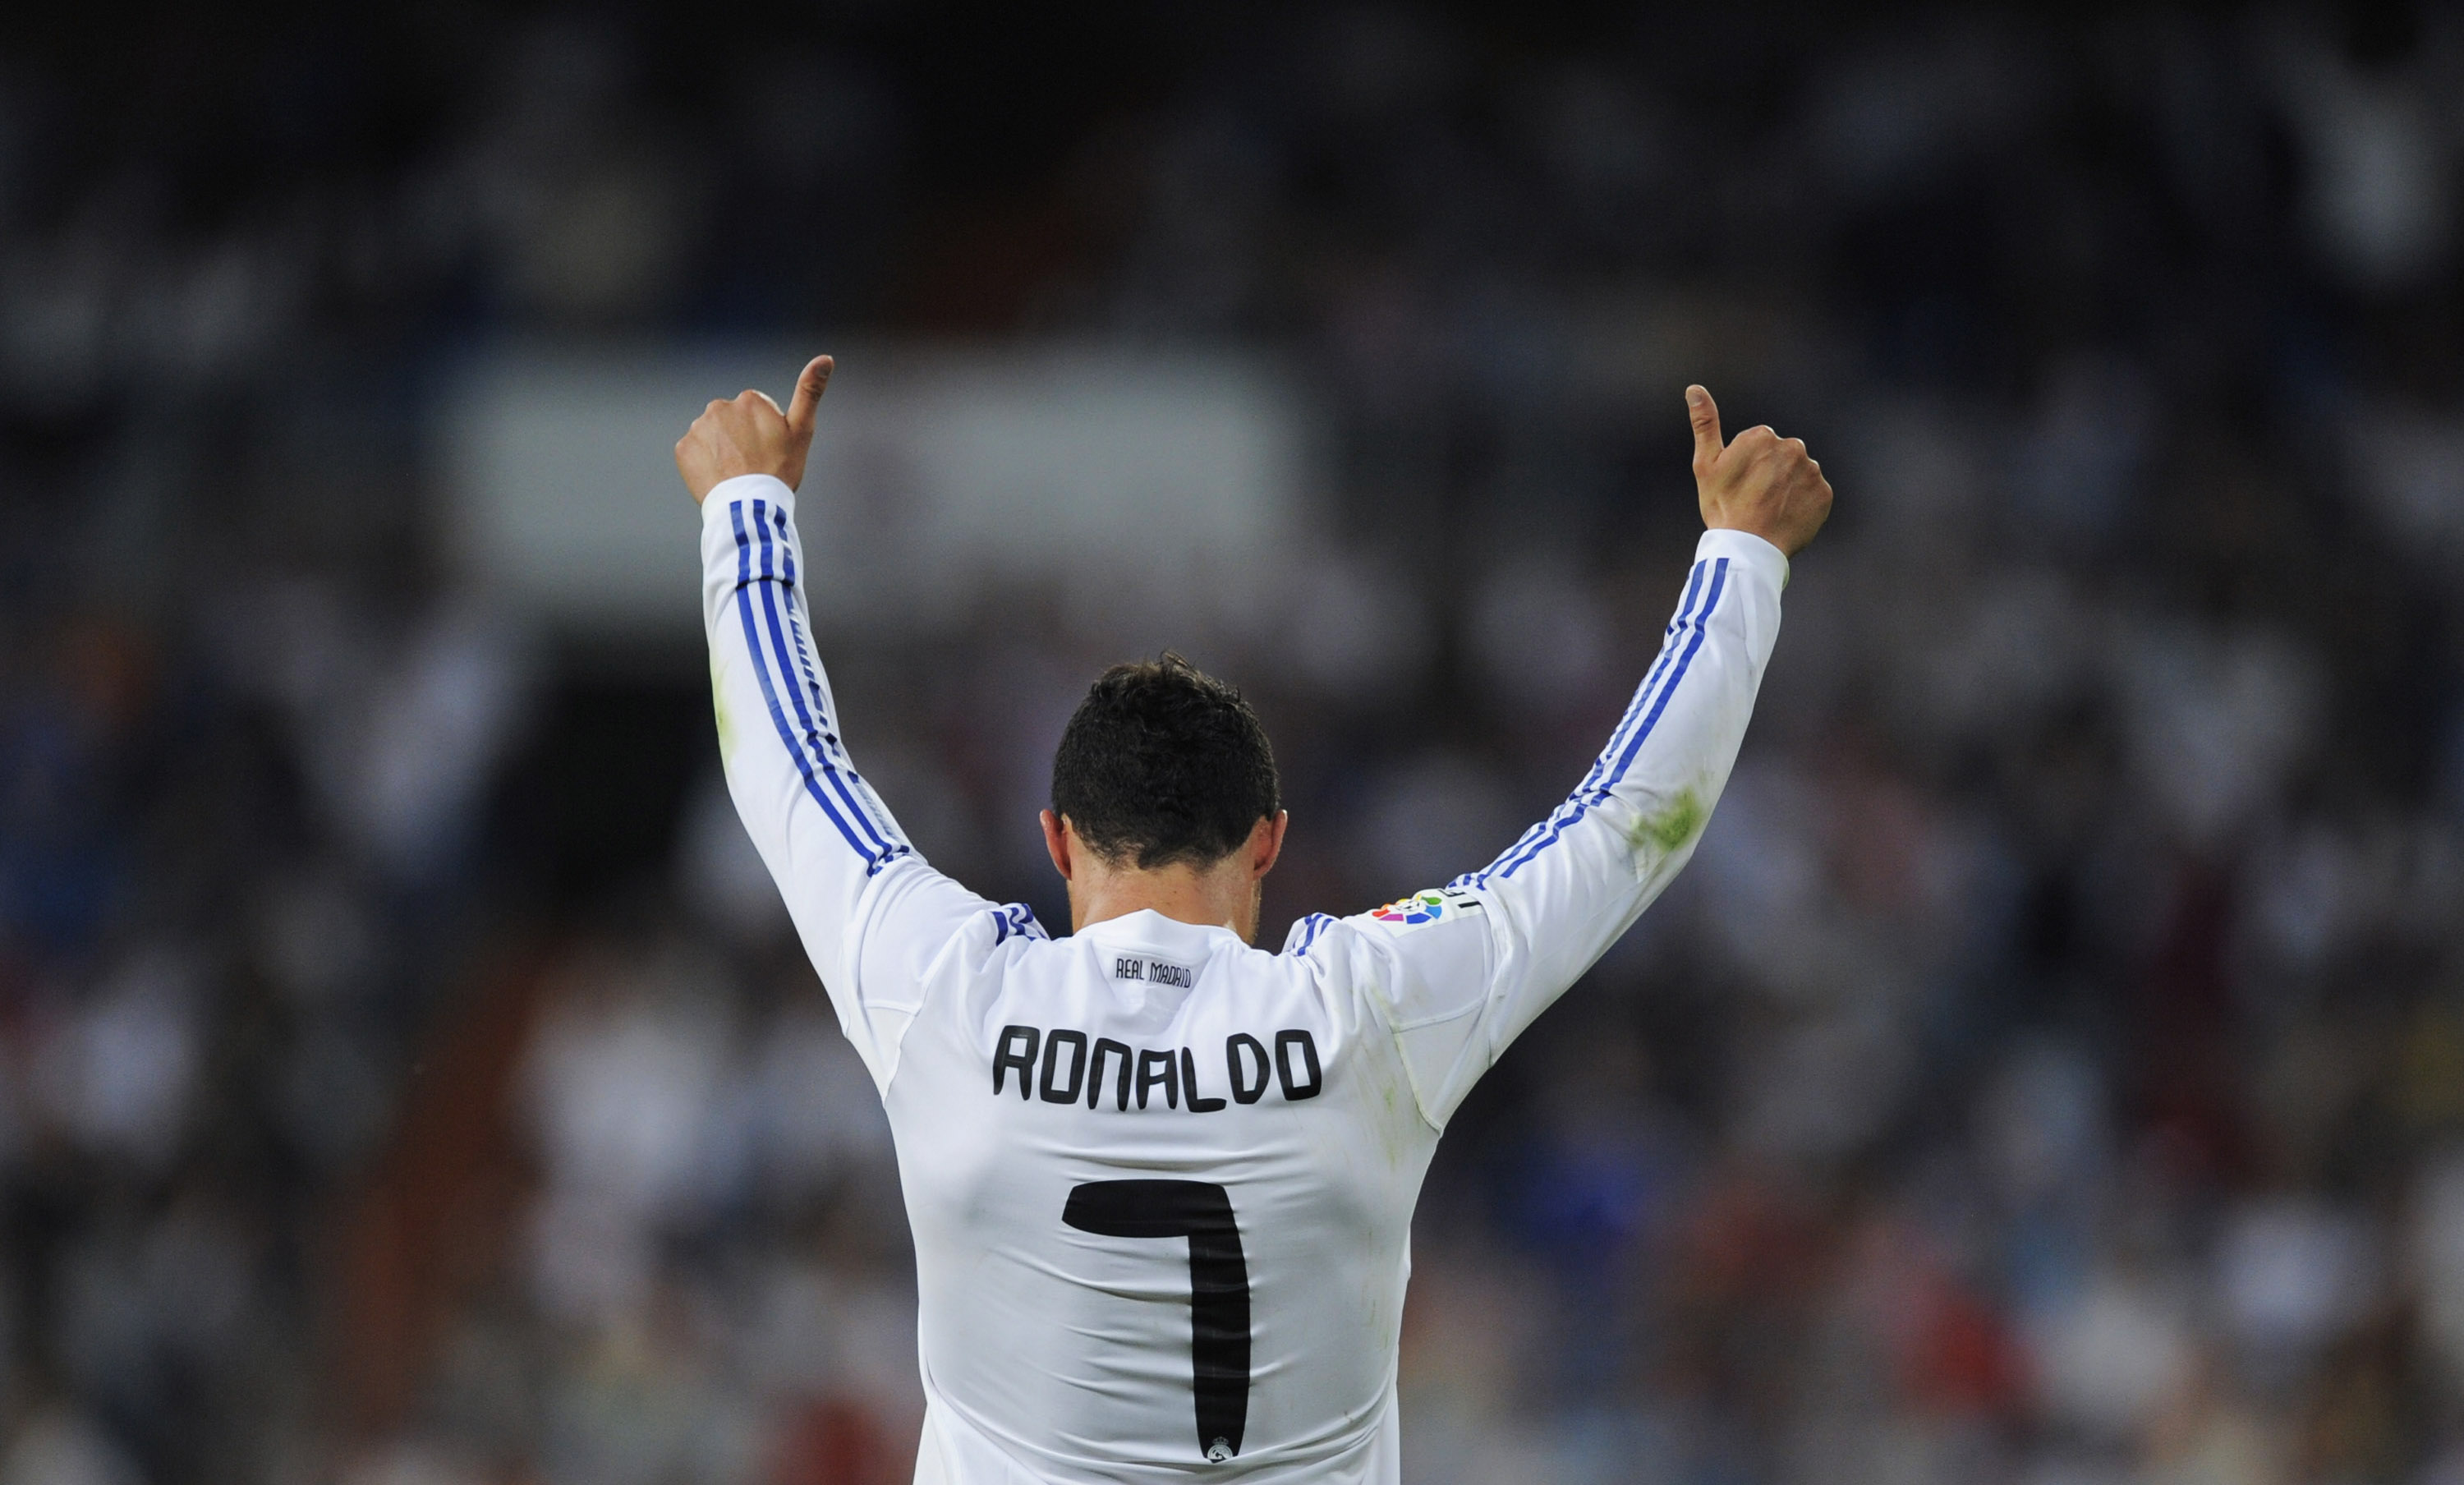 MADRID, SPAIN - MAY 21:  Cristiano Ronaldo of Real Madrid celebrates after scoring his 2nd goal during the La Liga match between Real Madrid and UD Almeria at Estadio Santiago Bernabeu on May 21, 2011 in Madrid, Spain.  (Photo by Denis Doyle/Getty Images)